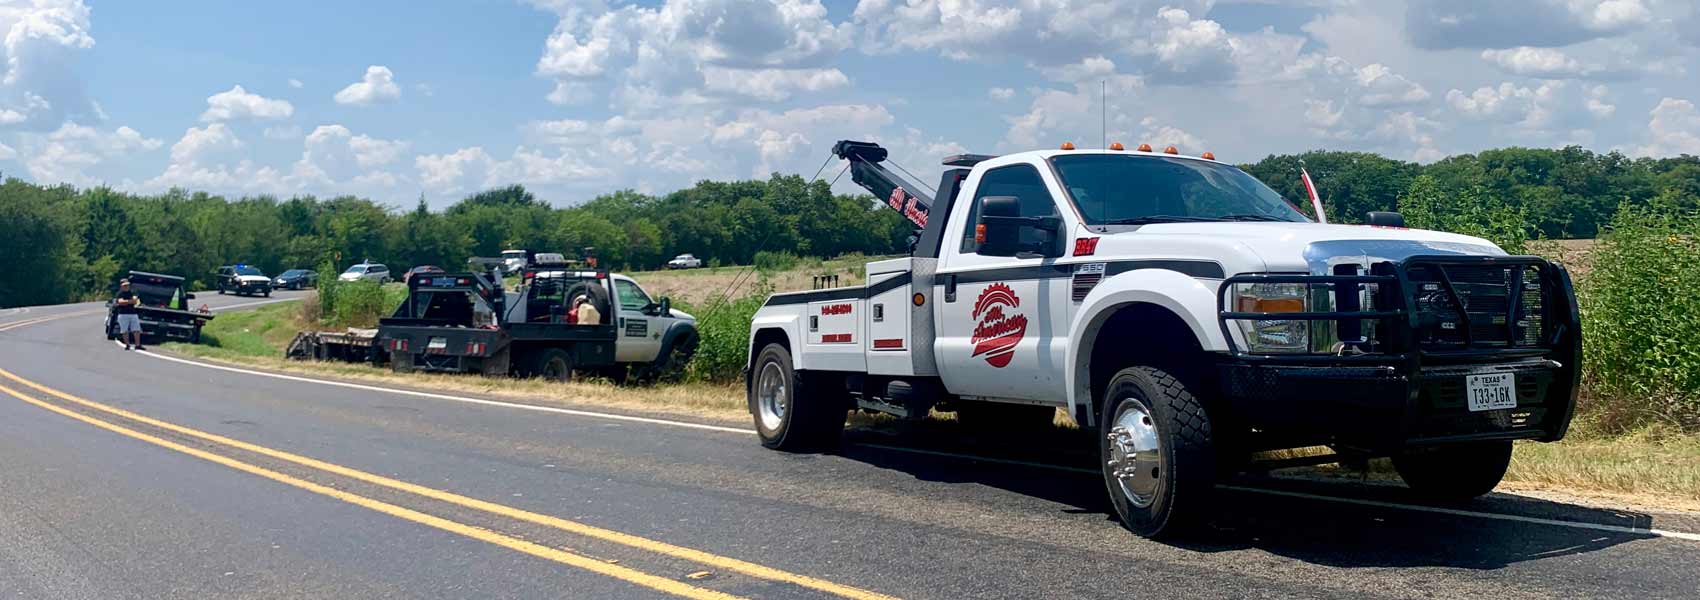 Roadside-Assistance-Denton-County-Texas-All-American-Towing